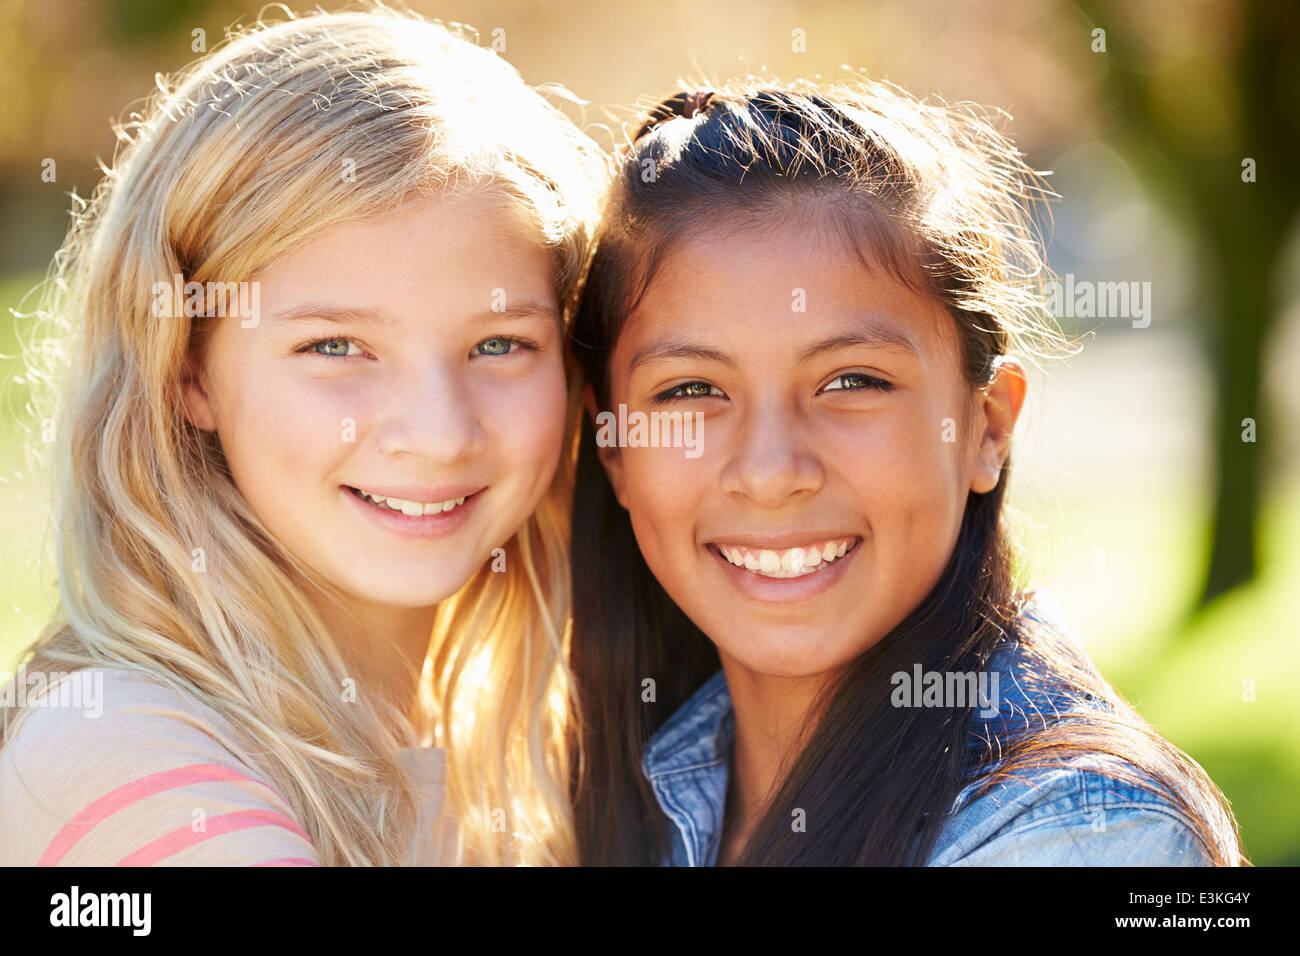 Portrait Of Two Pretty Girls In Countryside Stock Photo